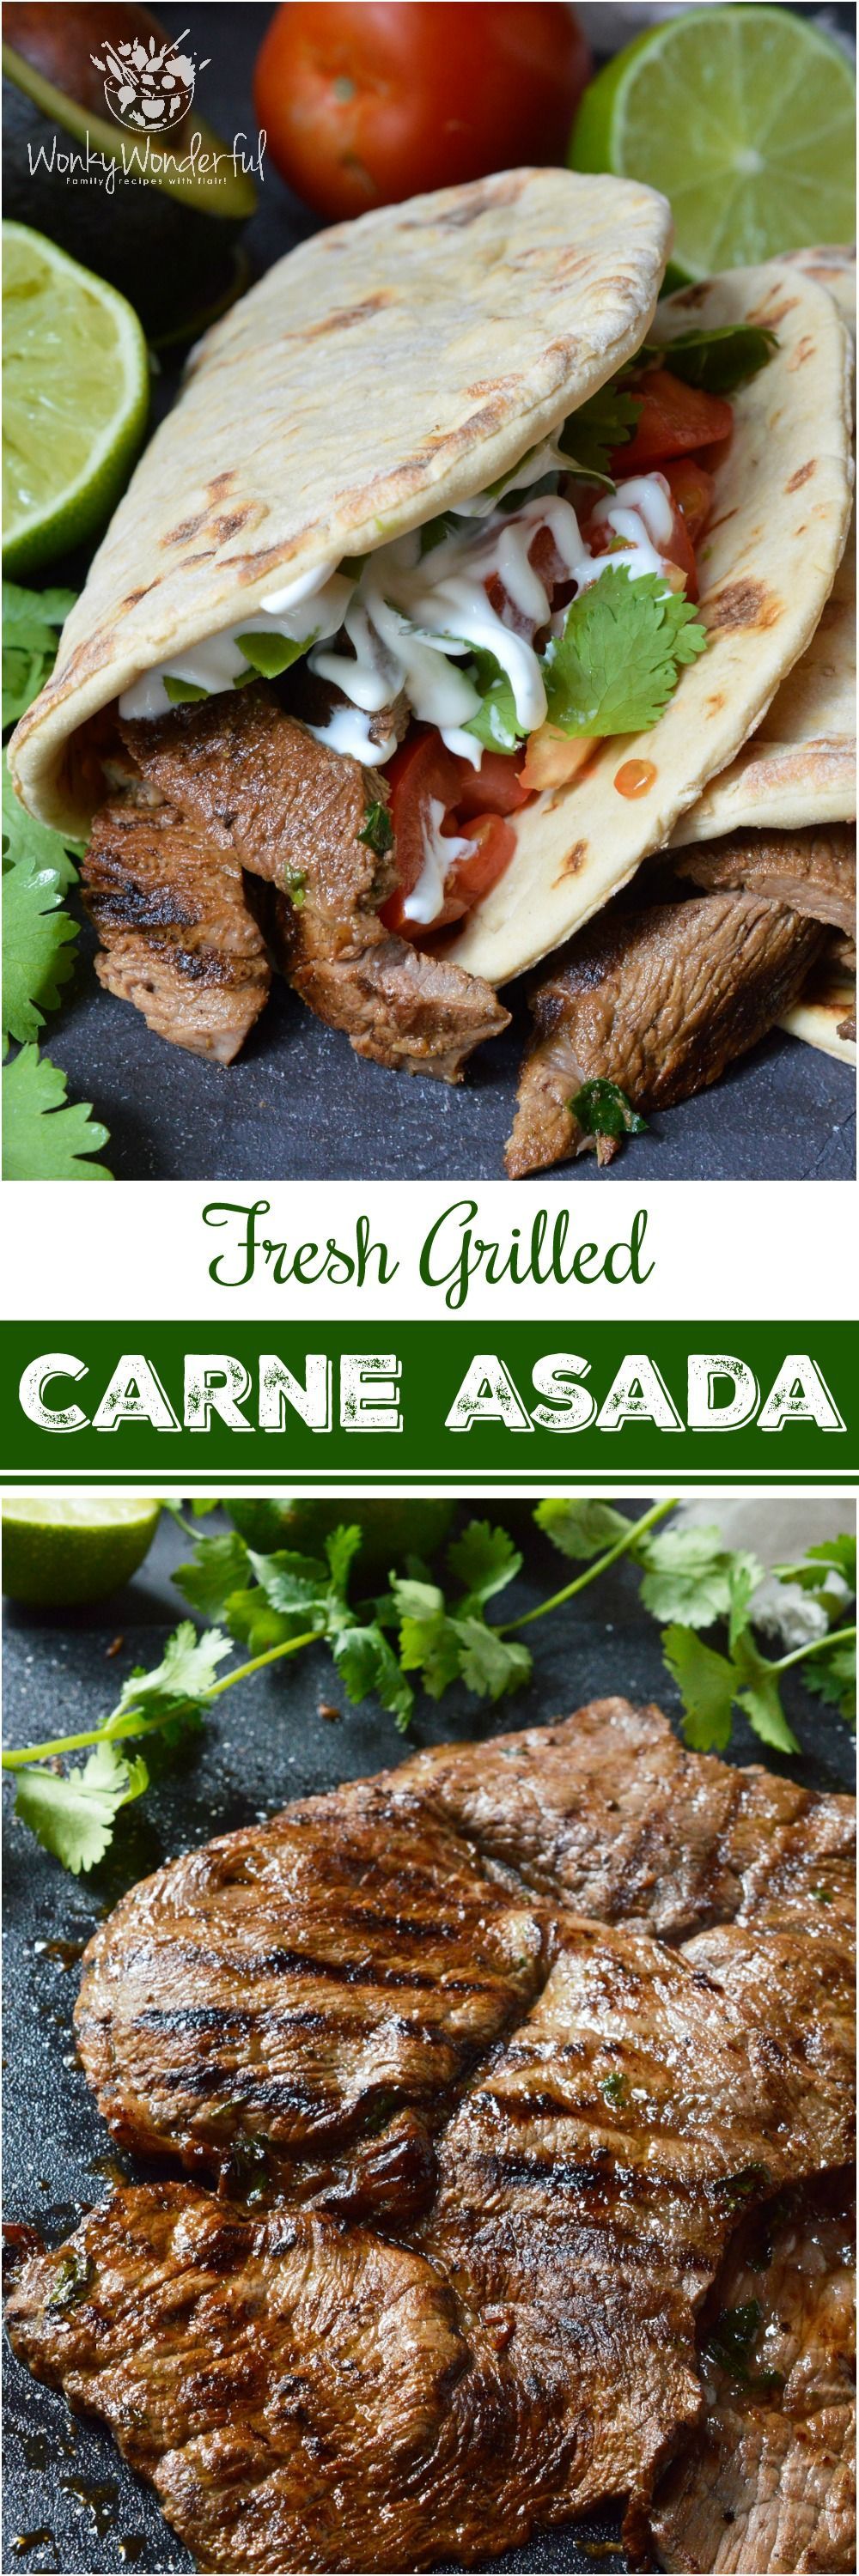 Nothing beats a great Carne Asada Recipe for the summertime grill season! This Carne Asada is made with thinly sliced round tip